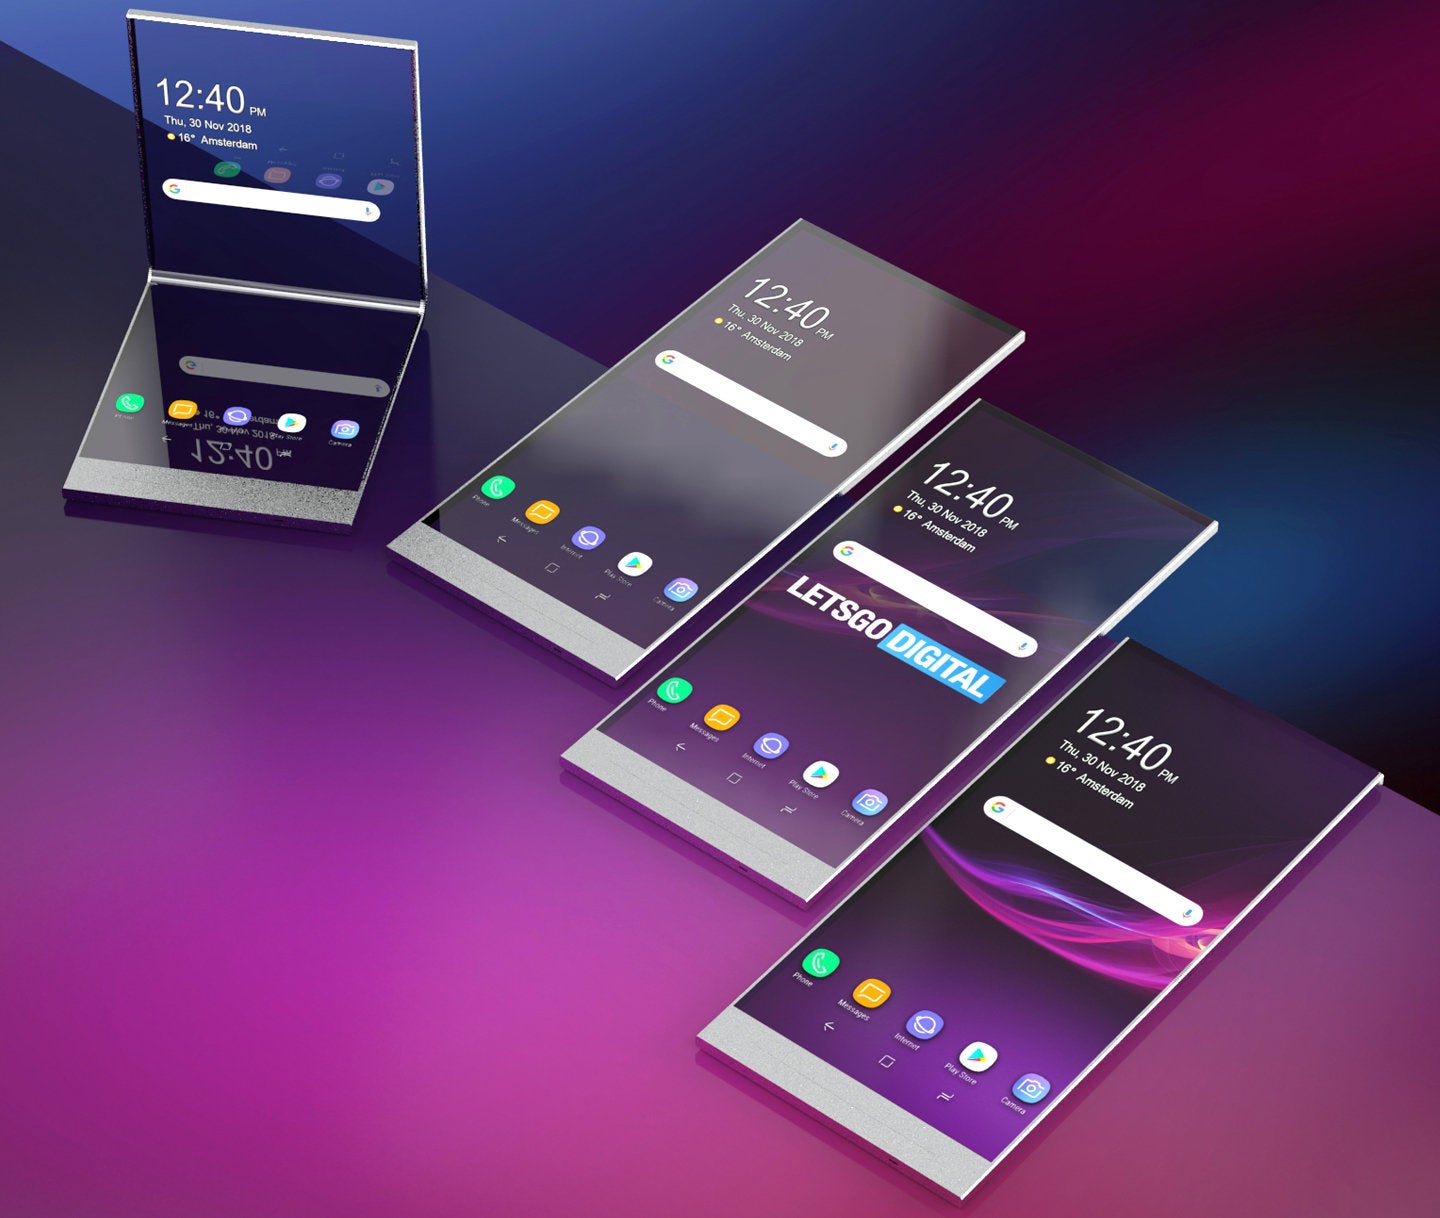 Renders based on the Sony patents - Sony's foldable smartphone may take the transparency route